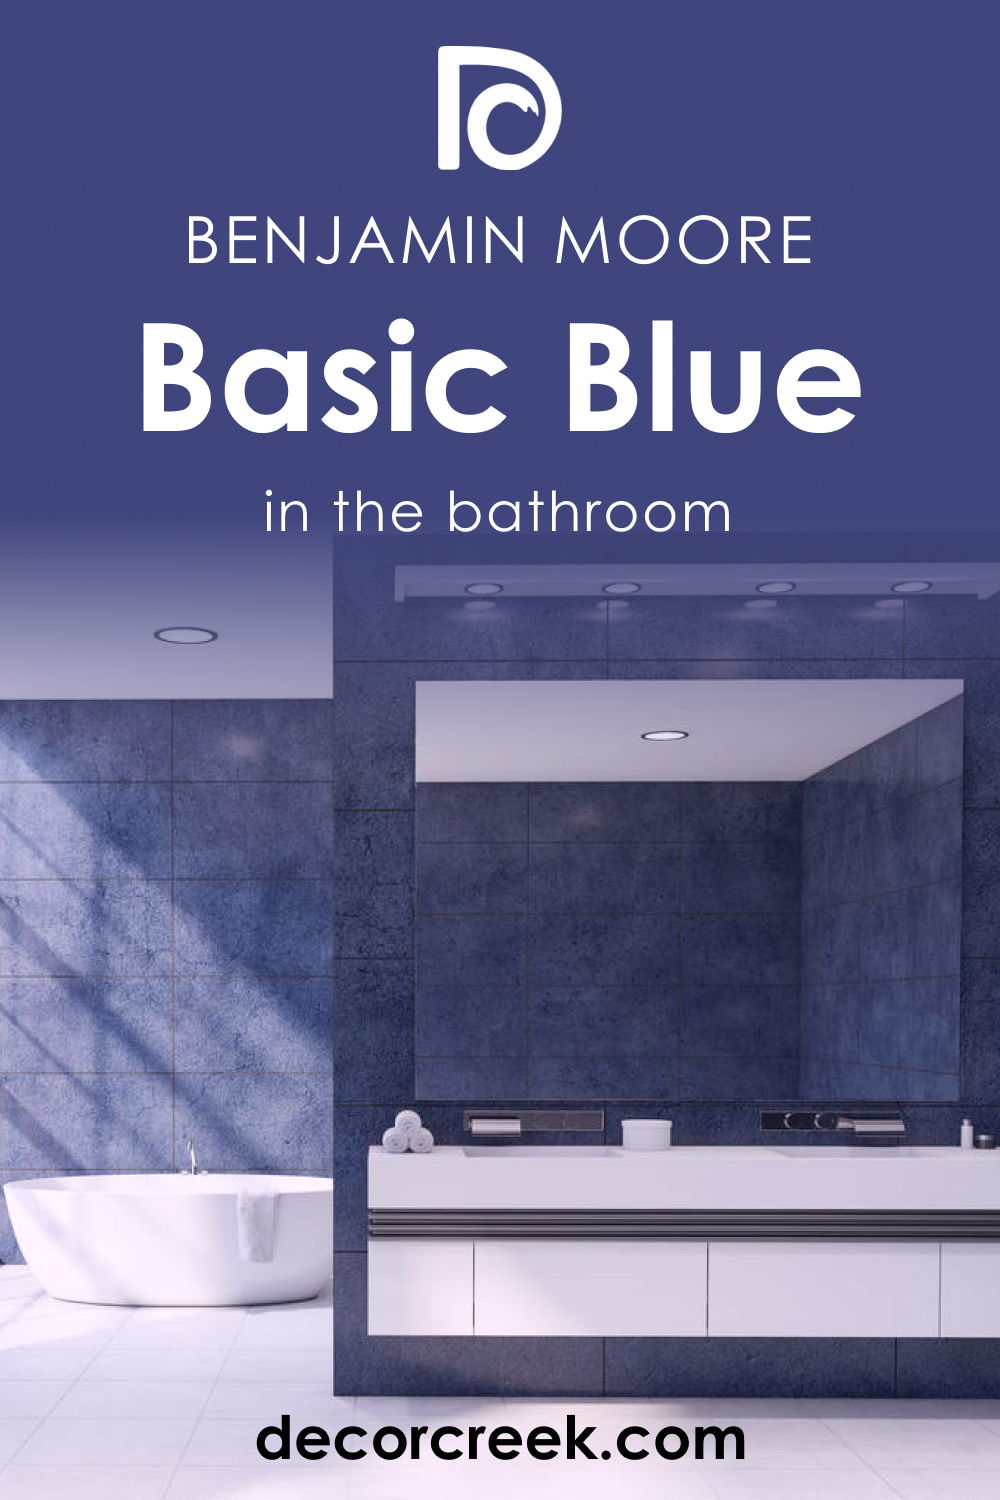 How to Use Basic Blue CC-968 in the Bathroom?